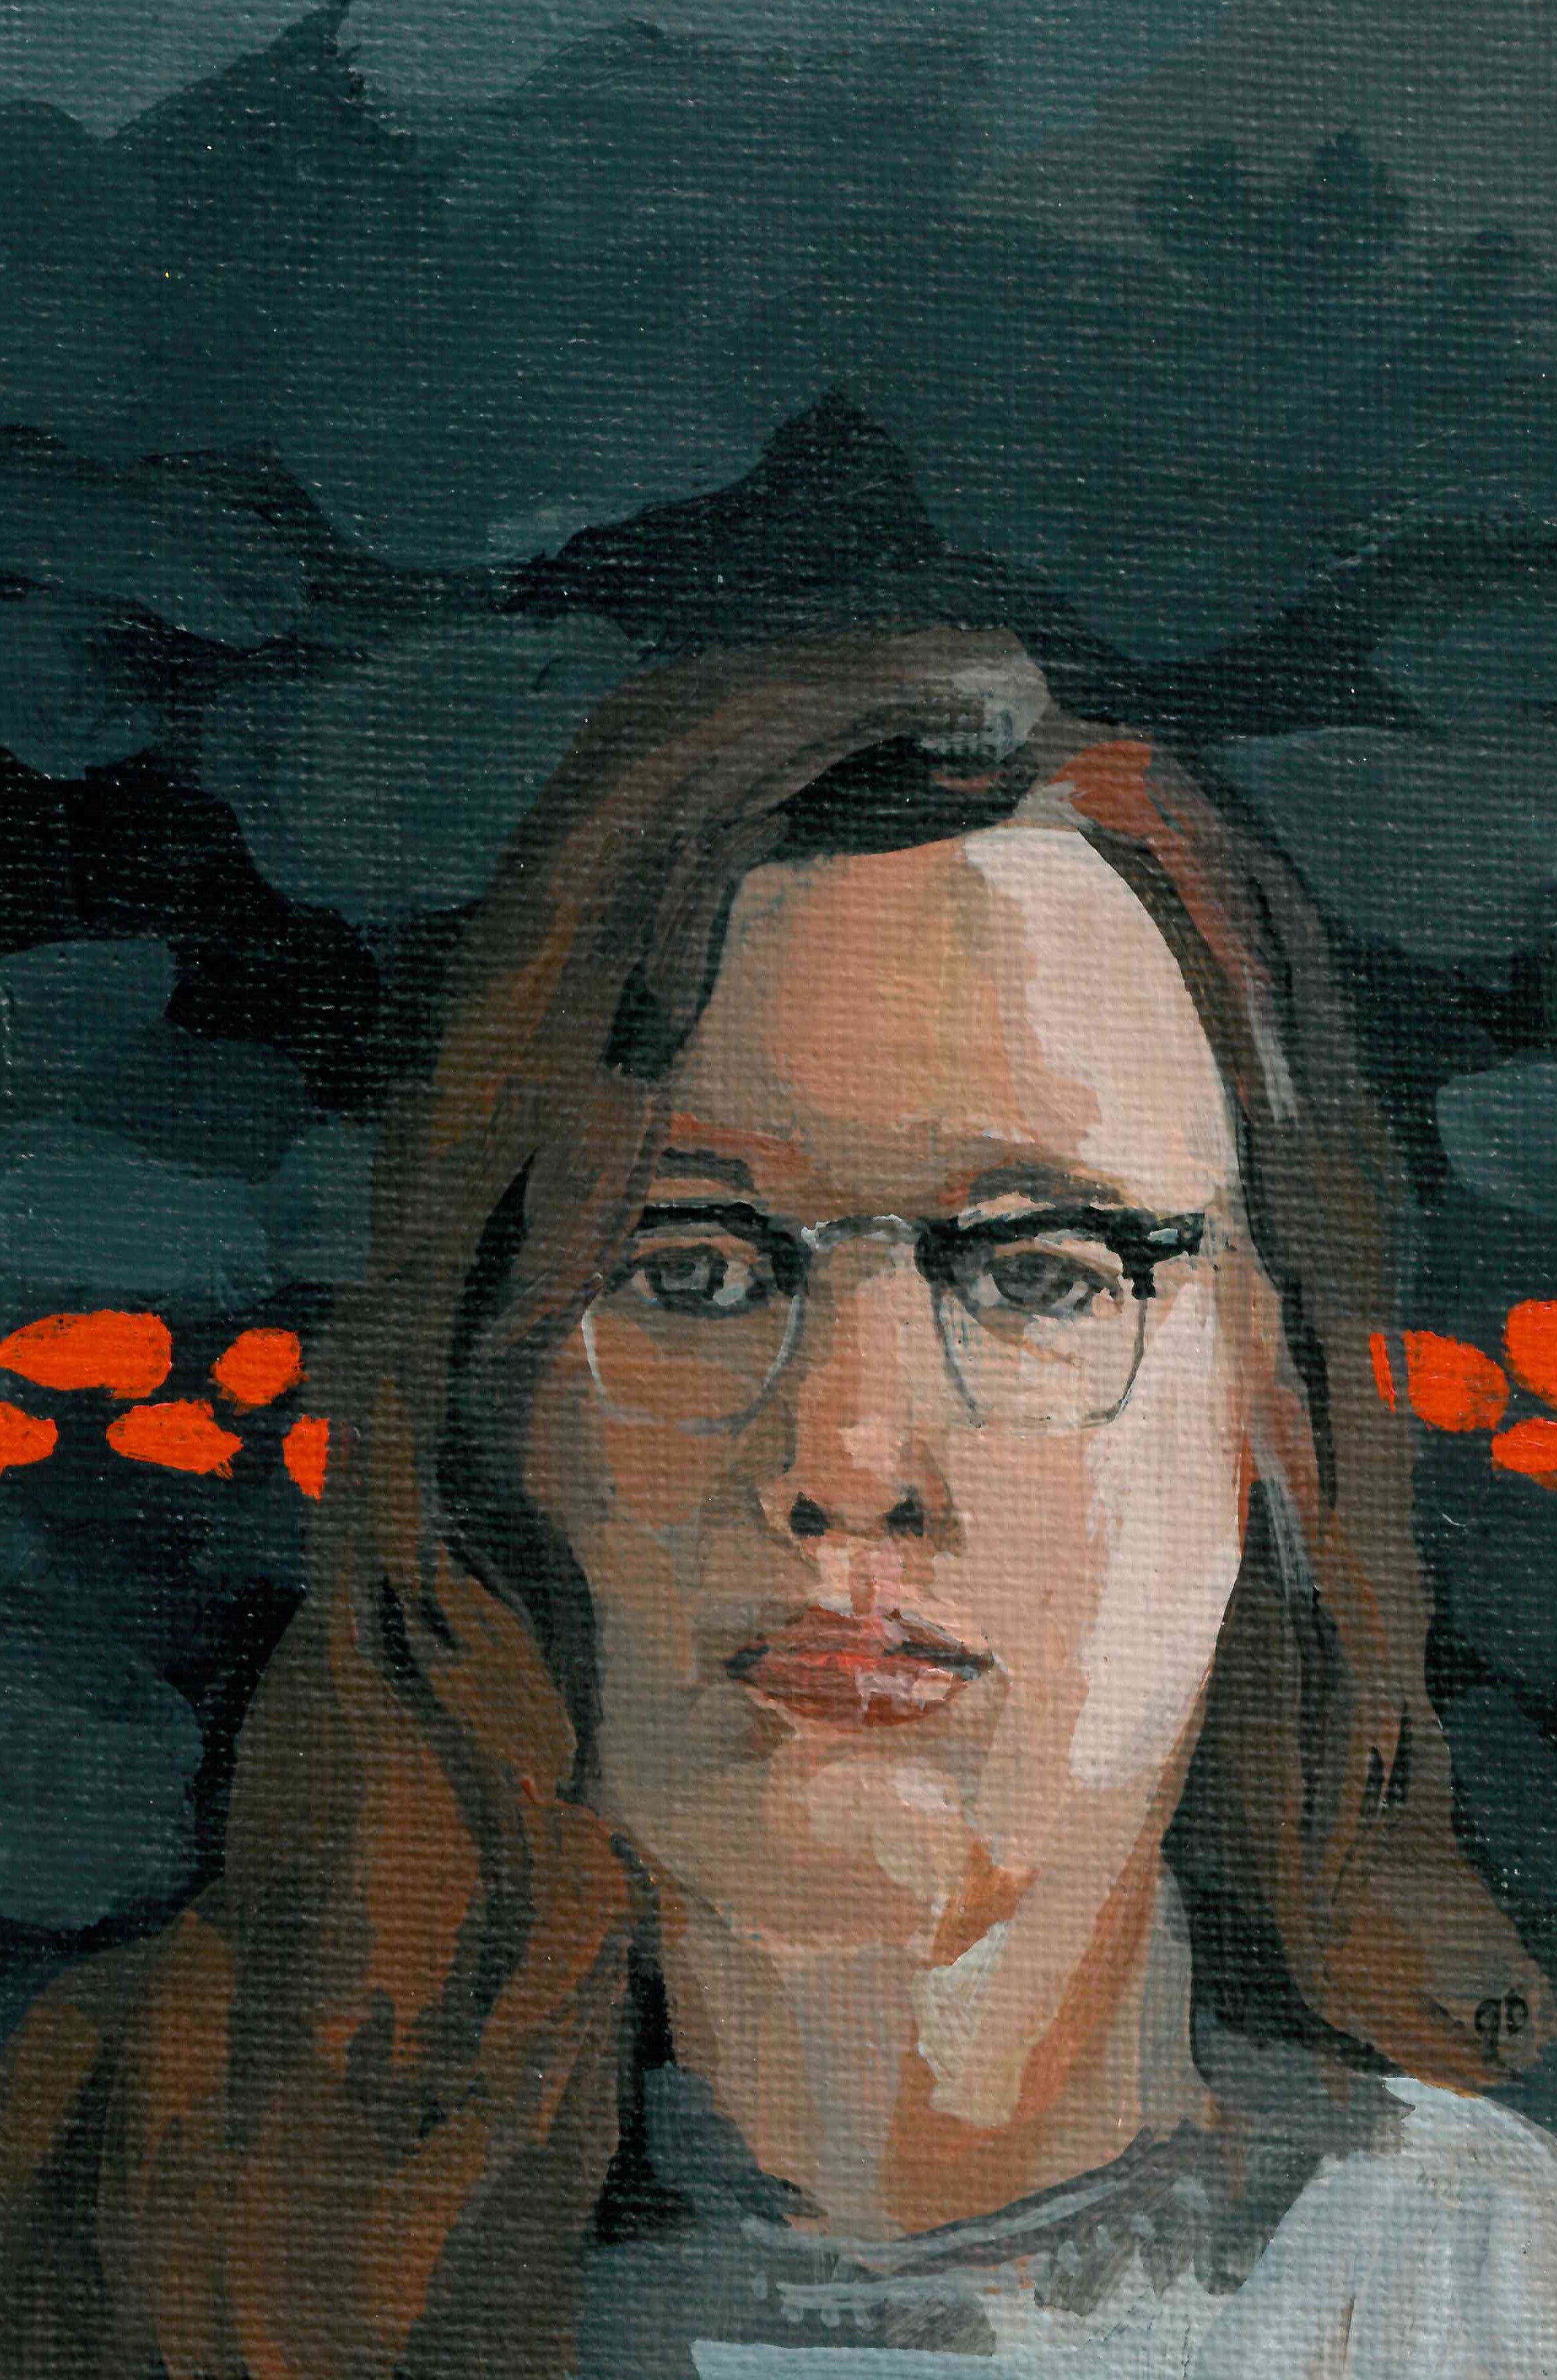 This was going to start as a gift for a friend I'd never met in real life, but then I thought about it for a while and reconsidered. You know what the creepiest gift you could receive on the planet is? A hand painted, unsmiling, uninvited self portrait from a woman who likes to make jokes about being a serial killer.